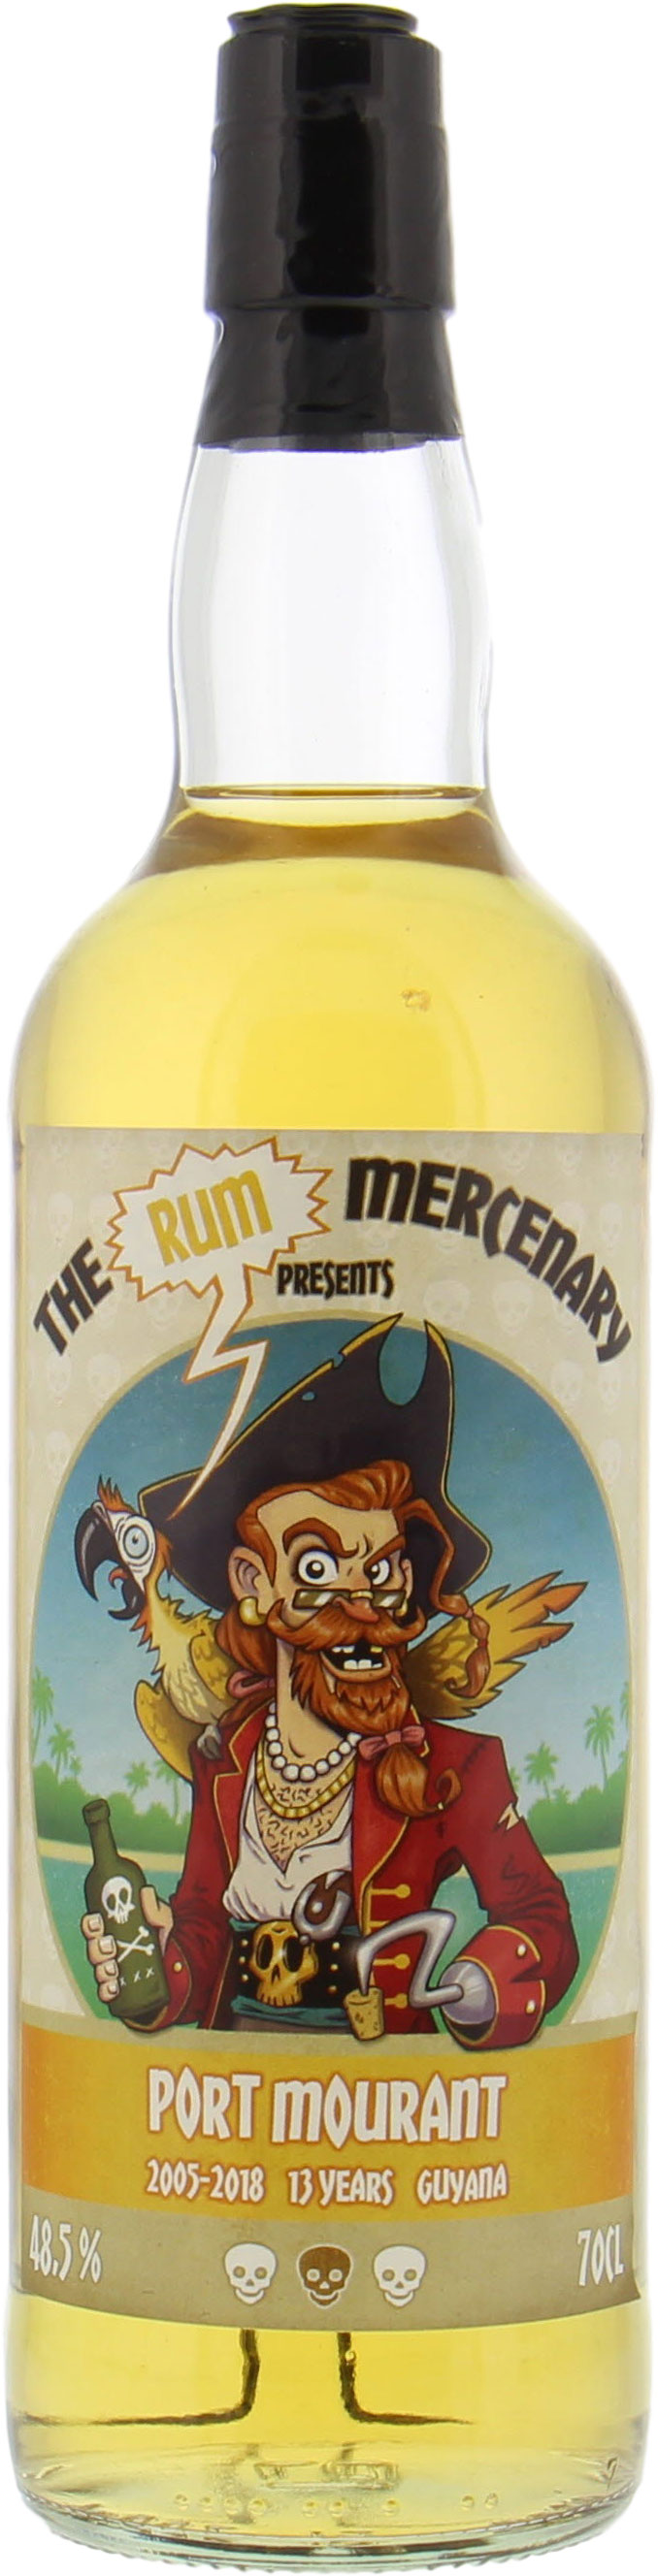 Port Mourant - 13 Years Old The Rum Mercenary 48.5% 2005 Perfect